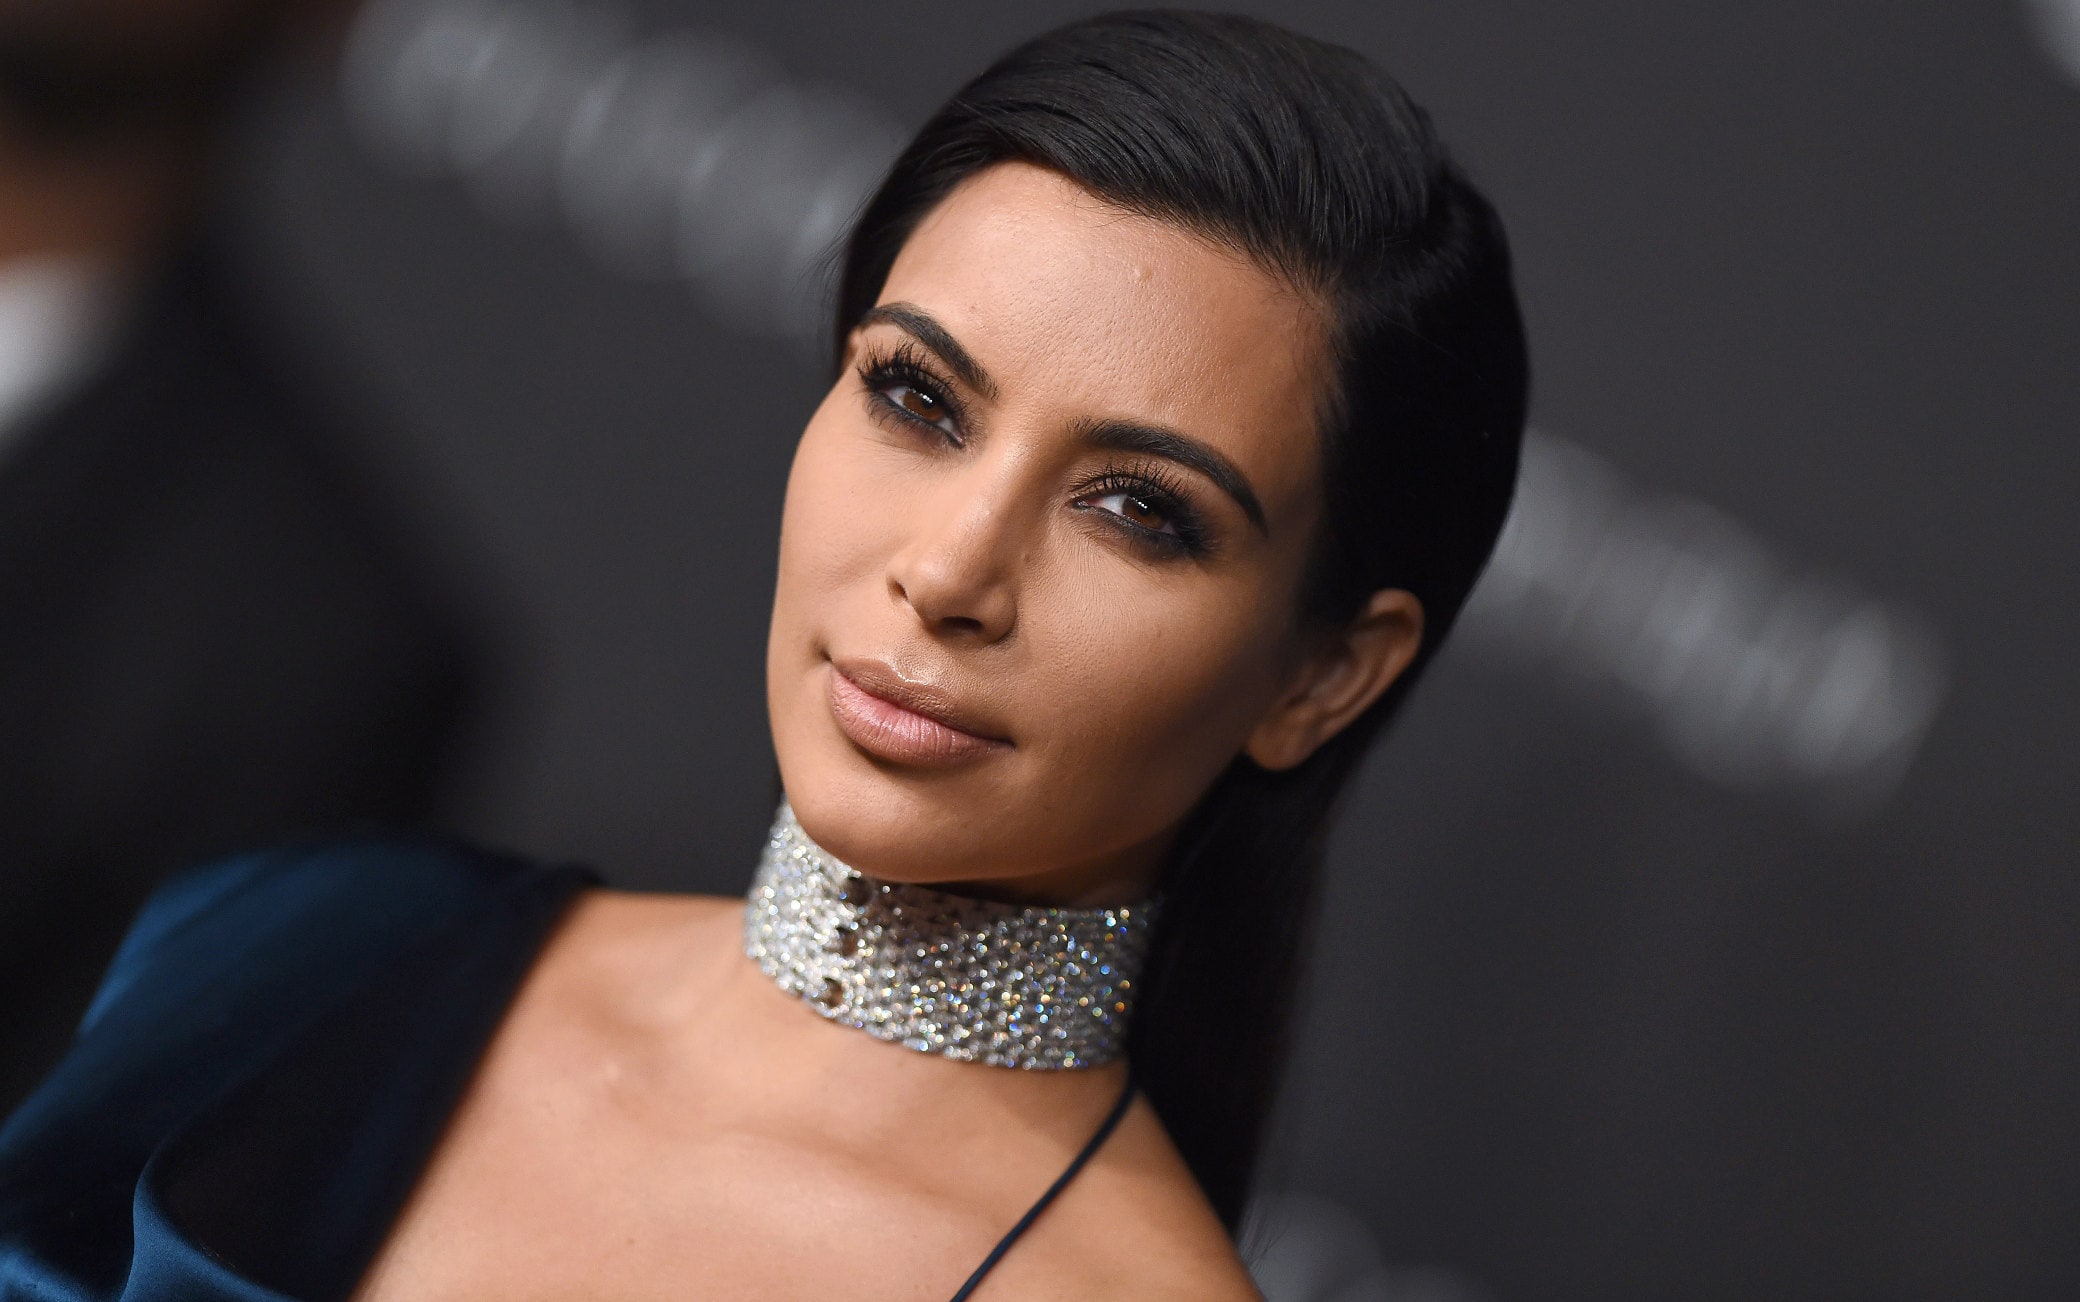 Kim Kardashian asked a judge to have ex-husband West’s last name removed